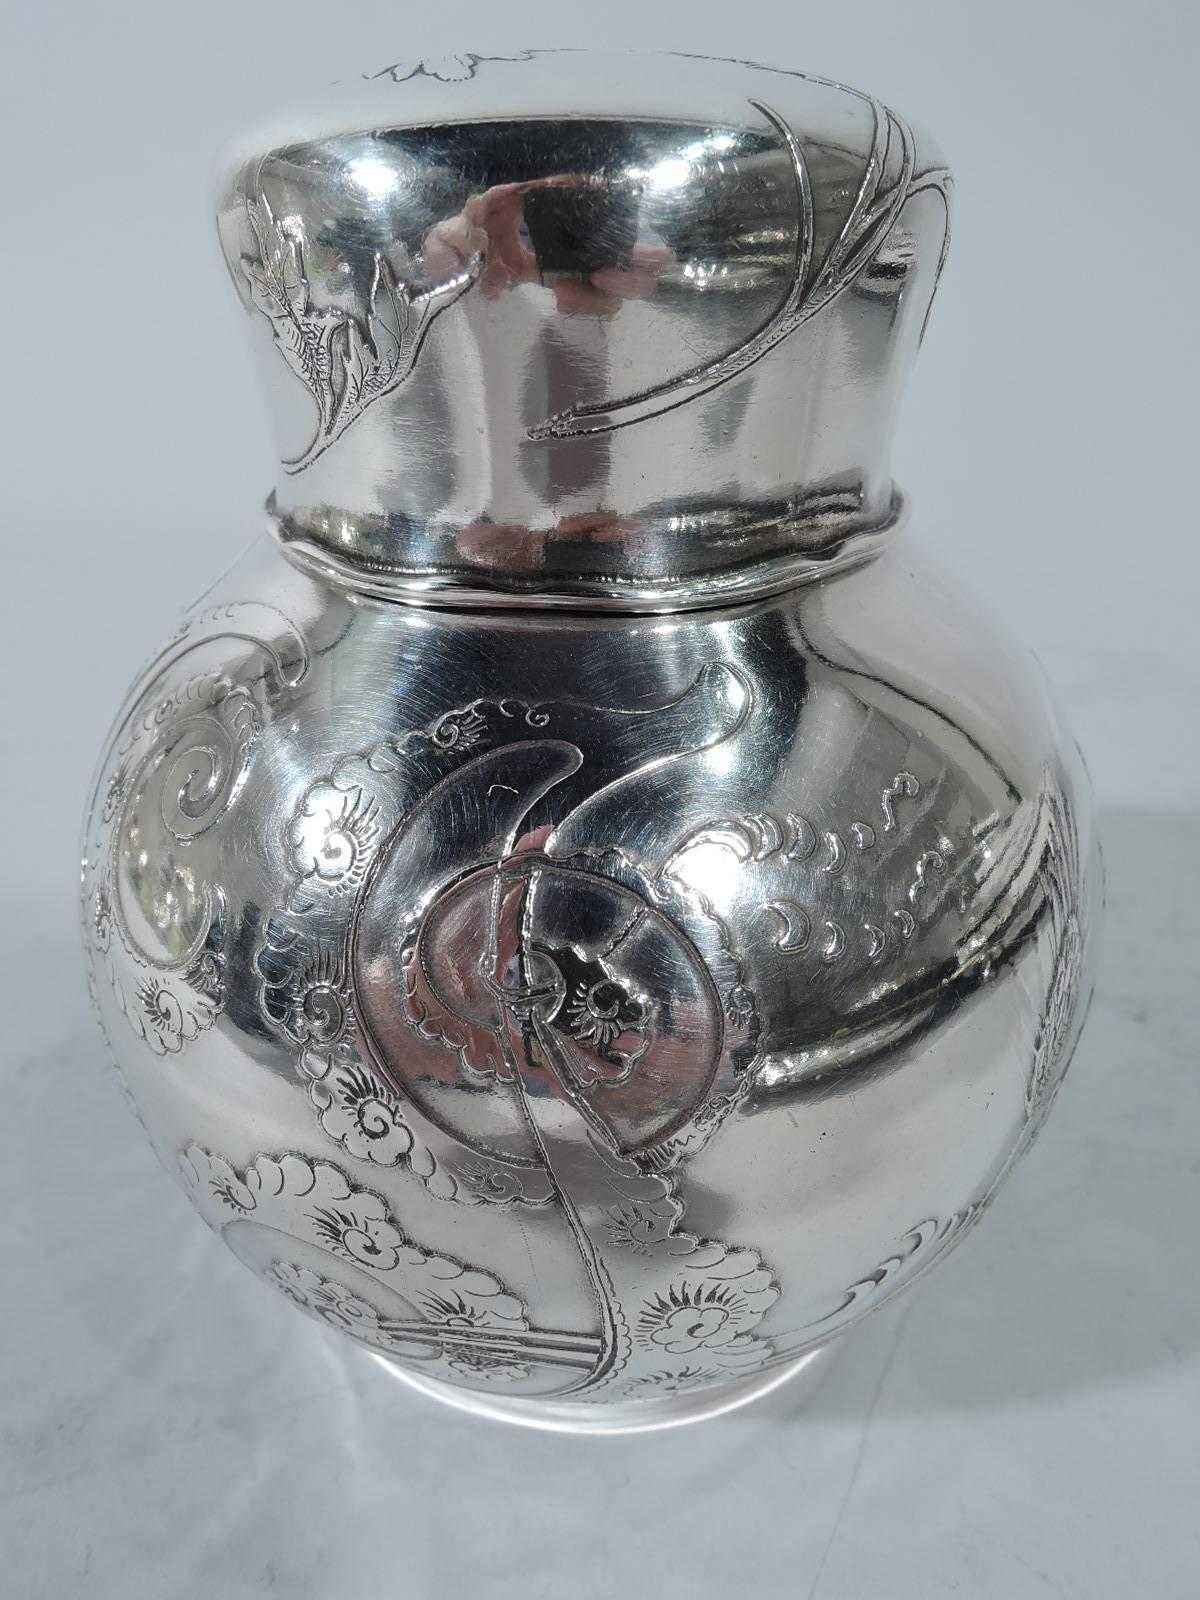 Aesthetic sterling silver tea caddy. Made by Tiffany & Co. in New York, circa 1877. Globular with short neck, interior cap, and snug-fitting cover. Acid-etched ornament heightened with engraving. Naturalistic plants (including thistles, daisies, and